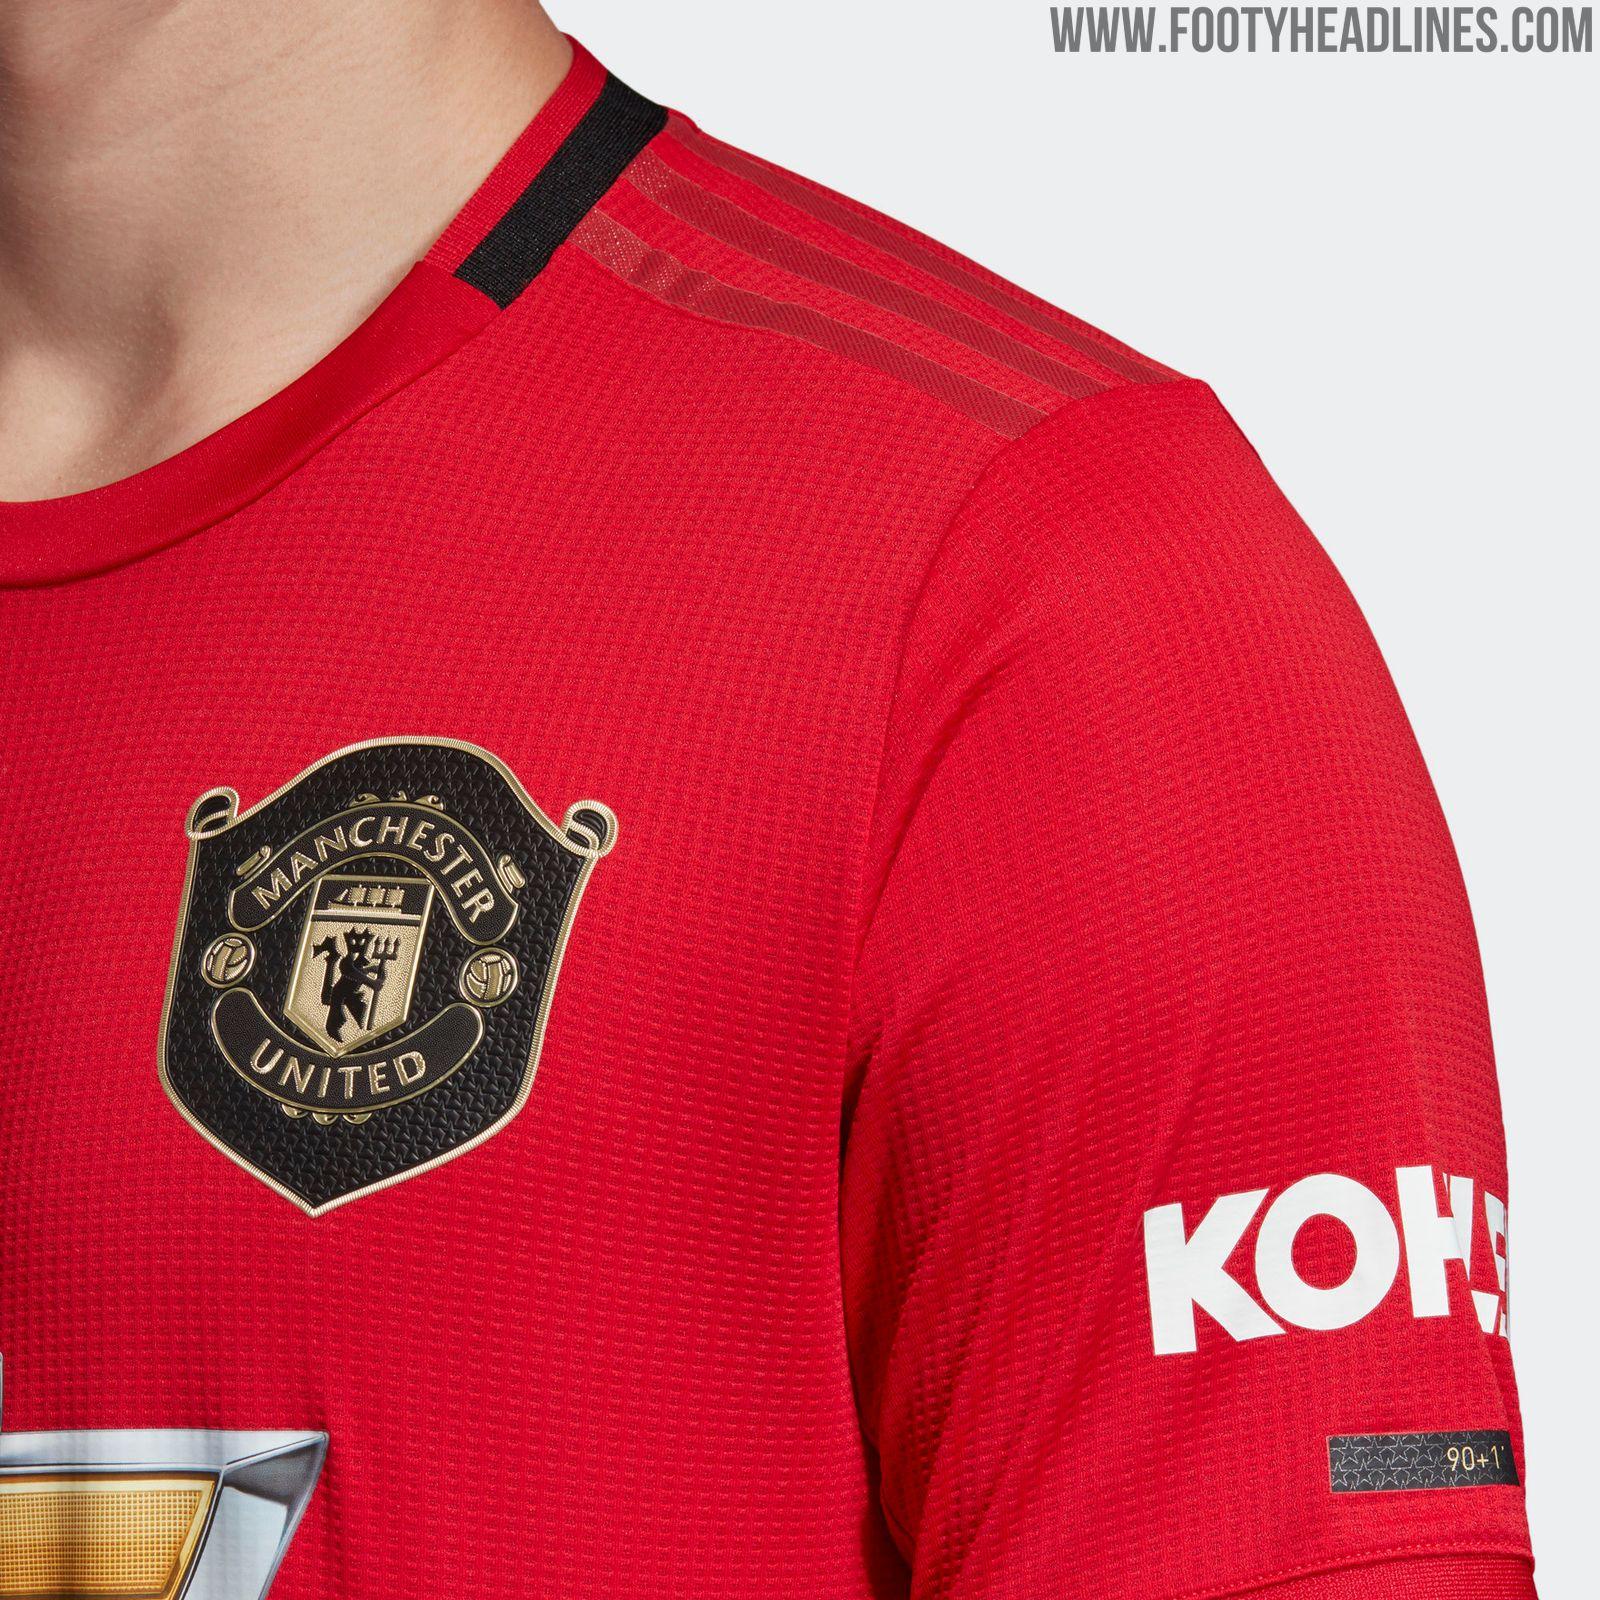 Manchester United 19 20 Home Kit Released